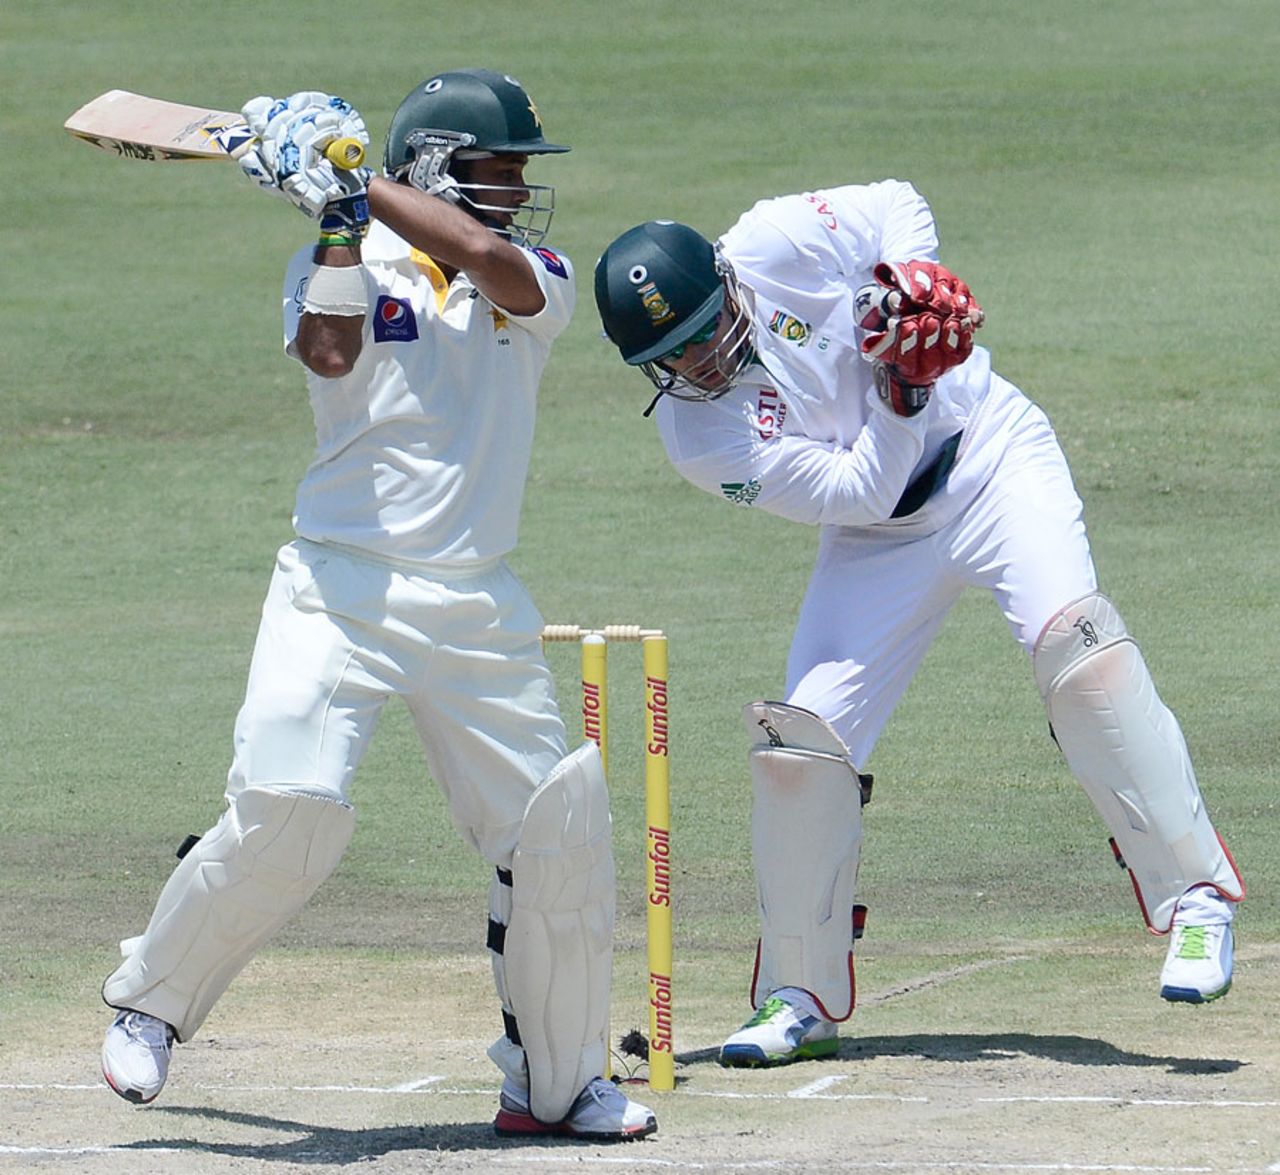 Imran Farhat cuts one square, South Africa v Pakistan, 3rd Test, Centurion, 3rd day, February 24, 2013